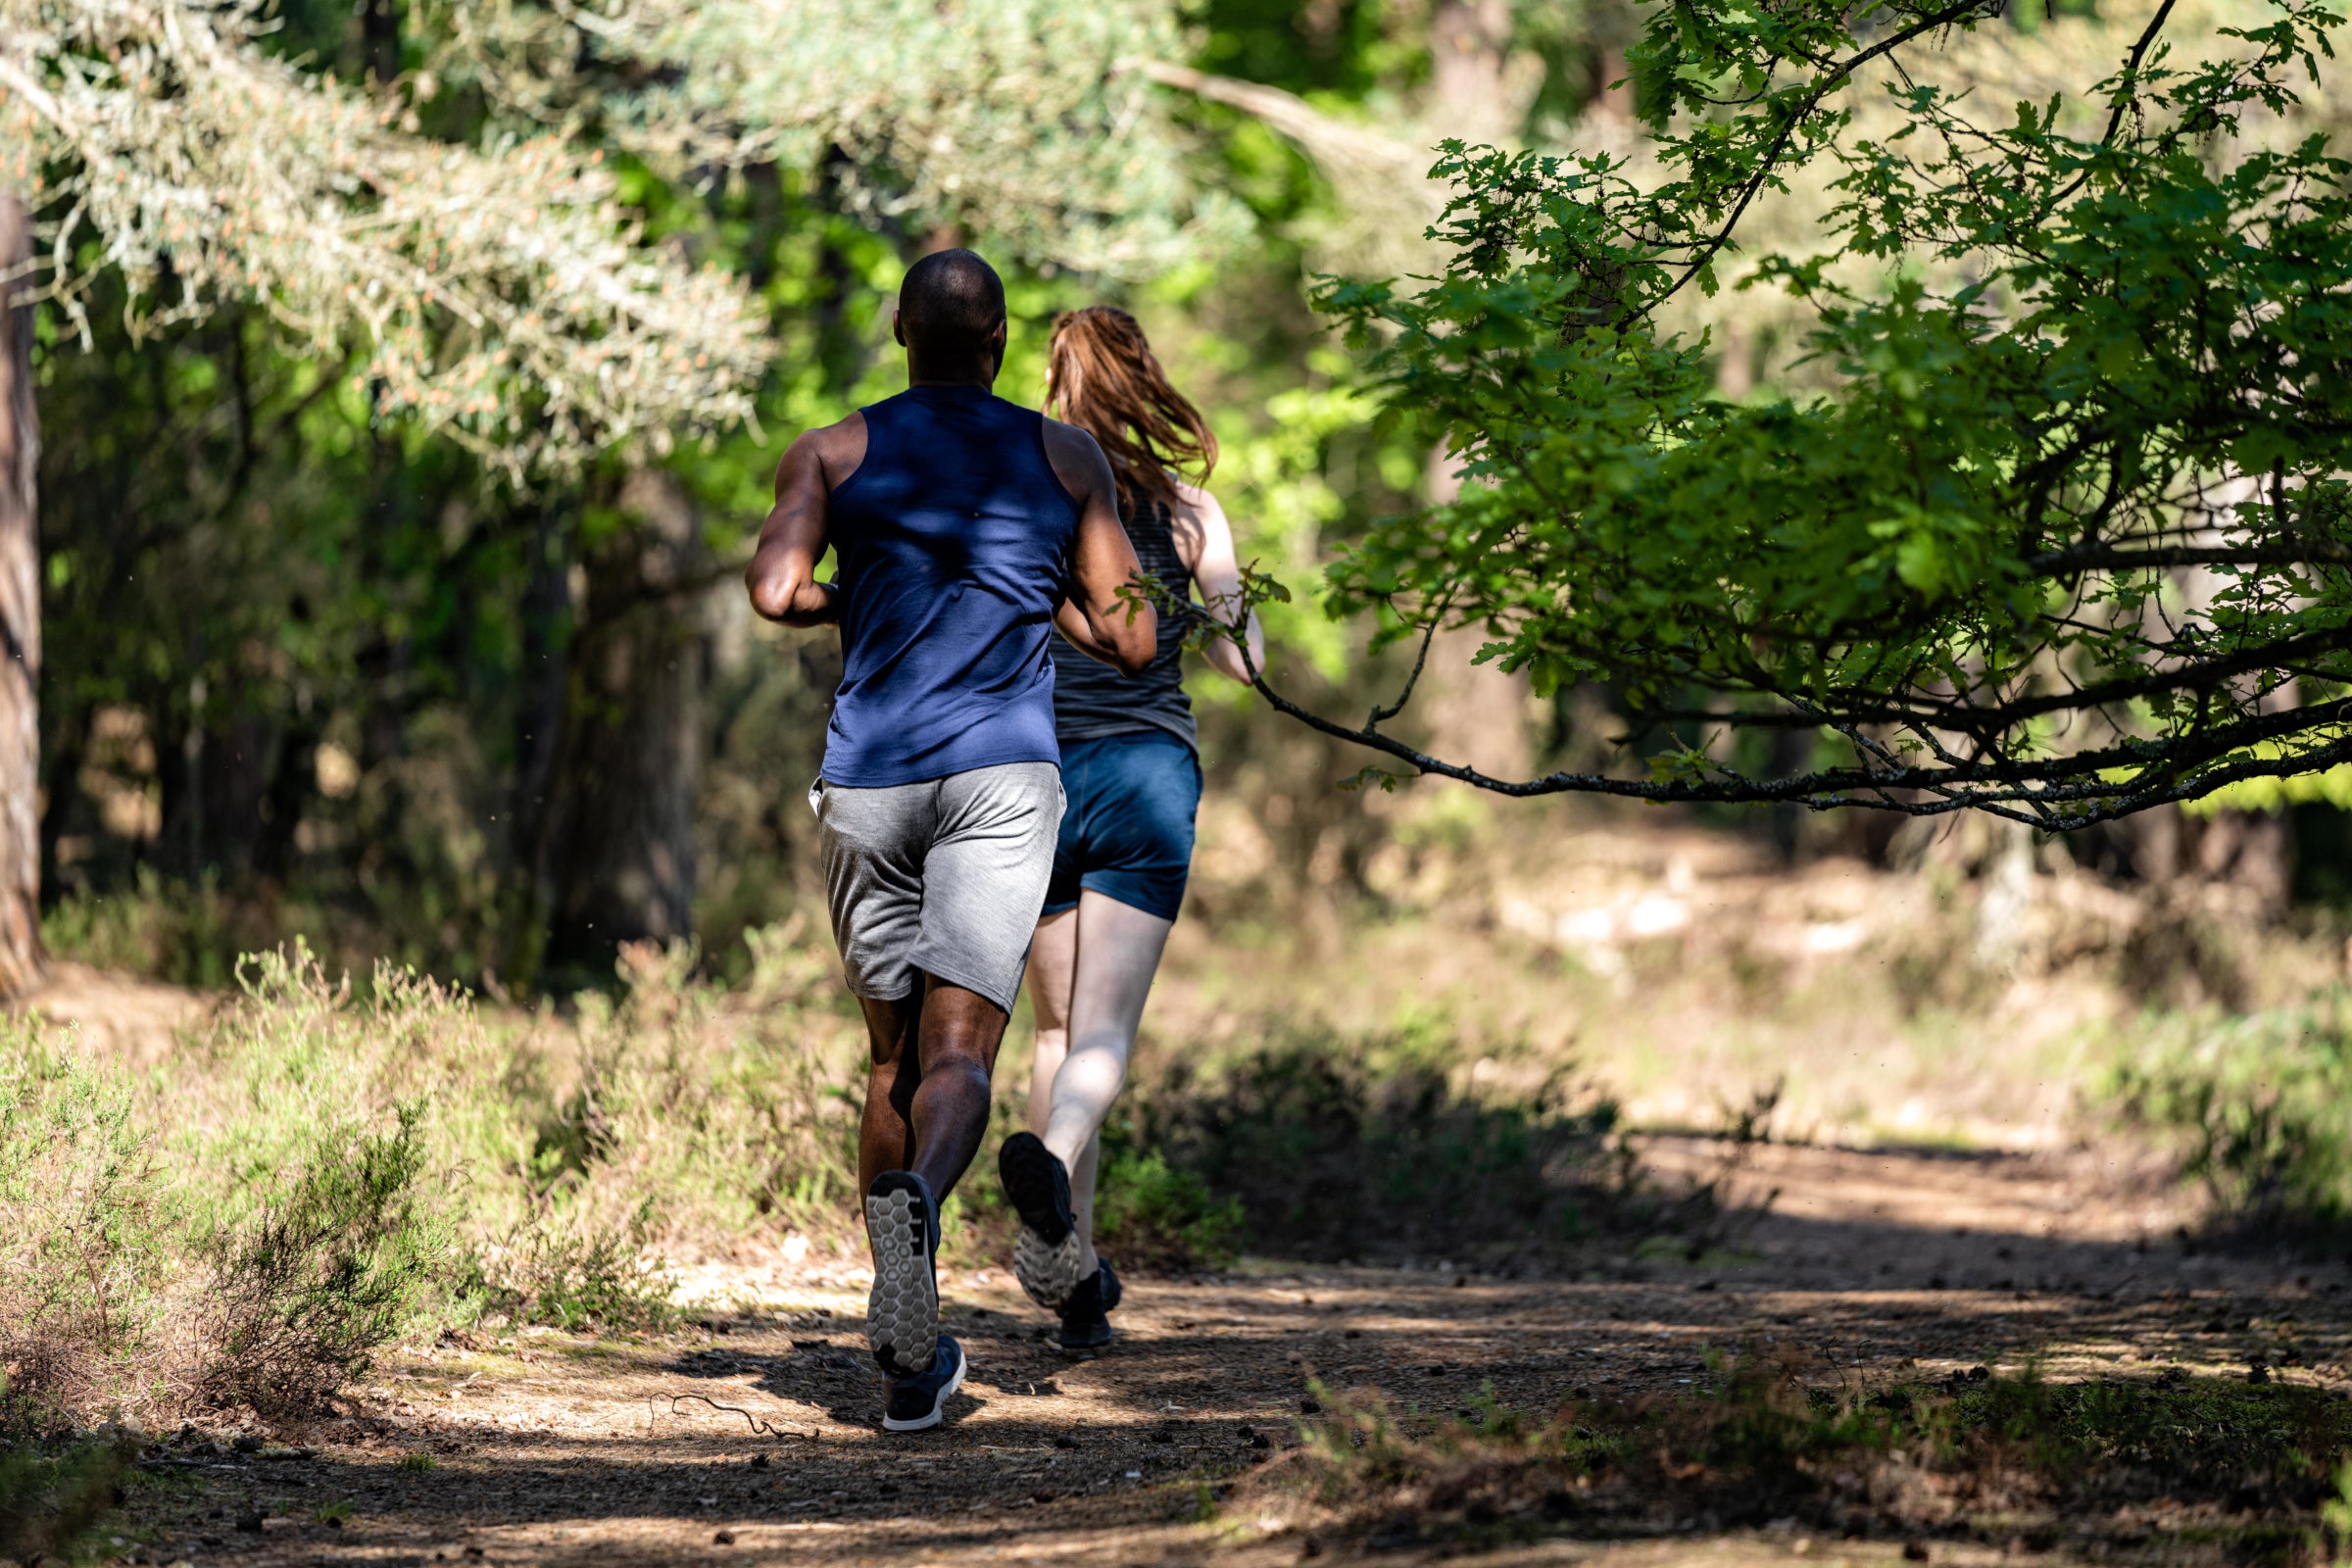 A man and a woman jogging on a forest trail, both dressed in merino activewear by Isobaa